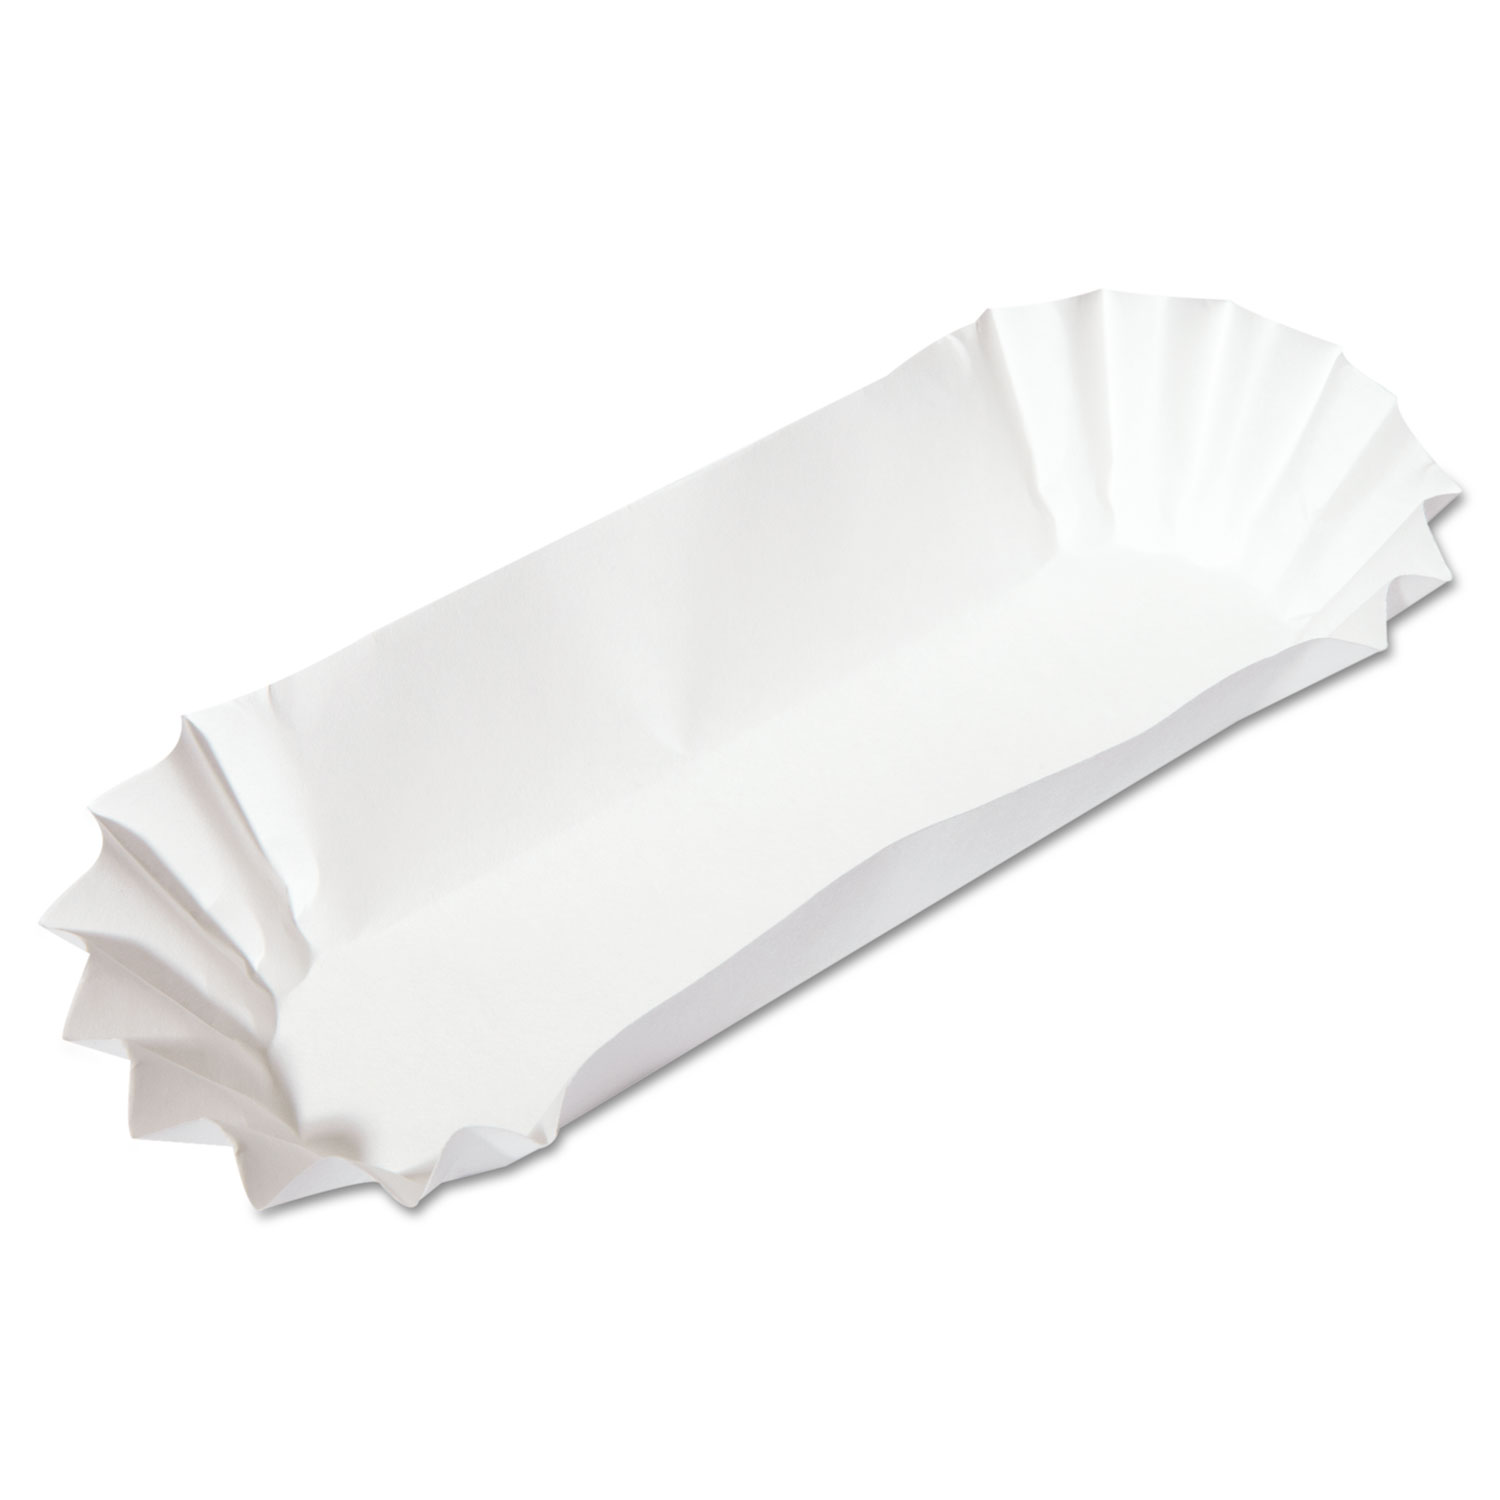  Hoffmaster 610740 Fluted Hot Dog Trays, 6w x 2d x 2h, White, 500/Sleeve, 6 Sleeves/Carton (HFM610740) 